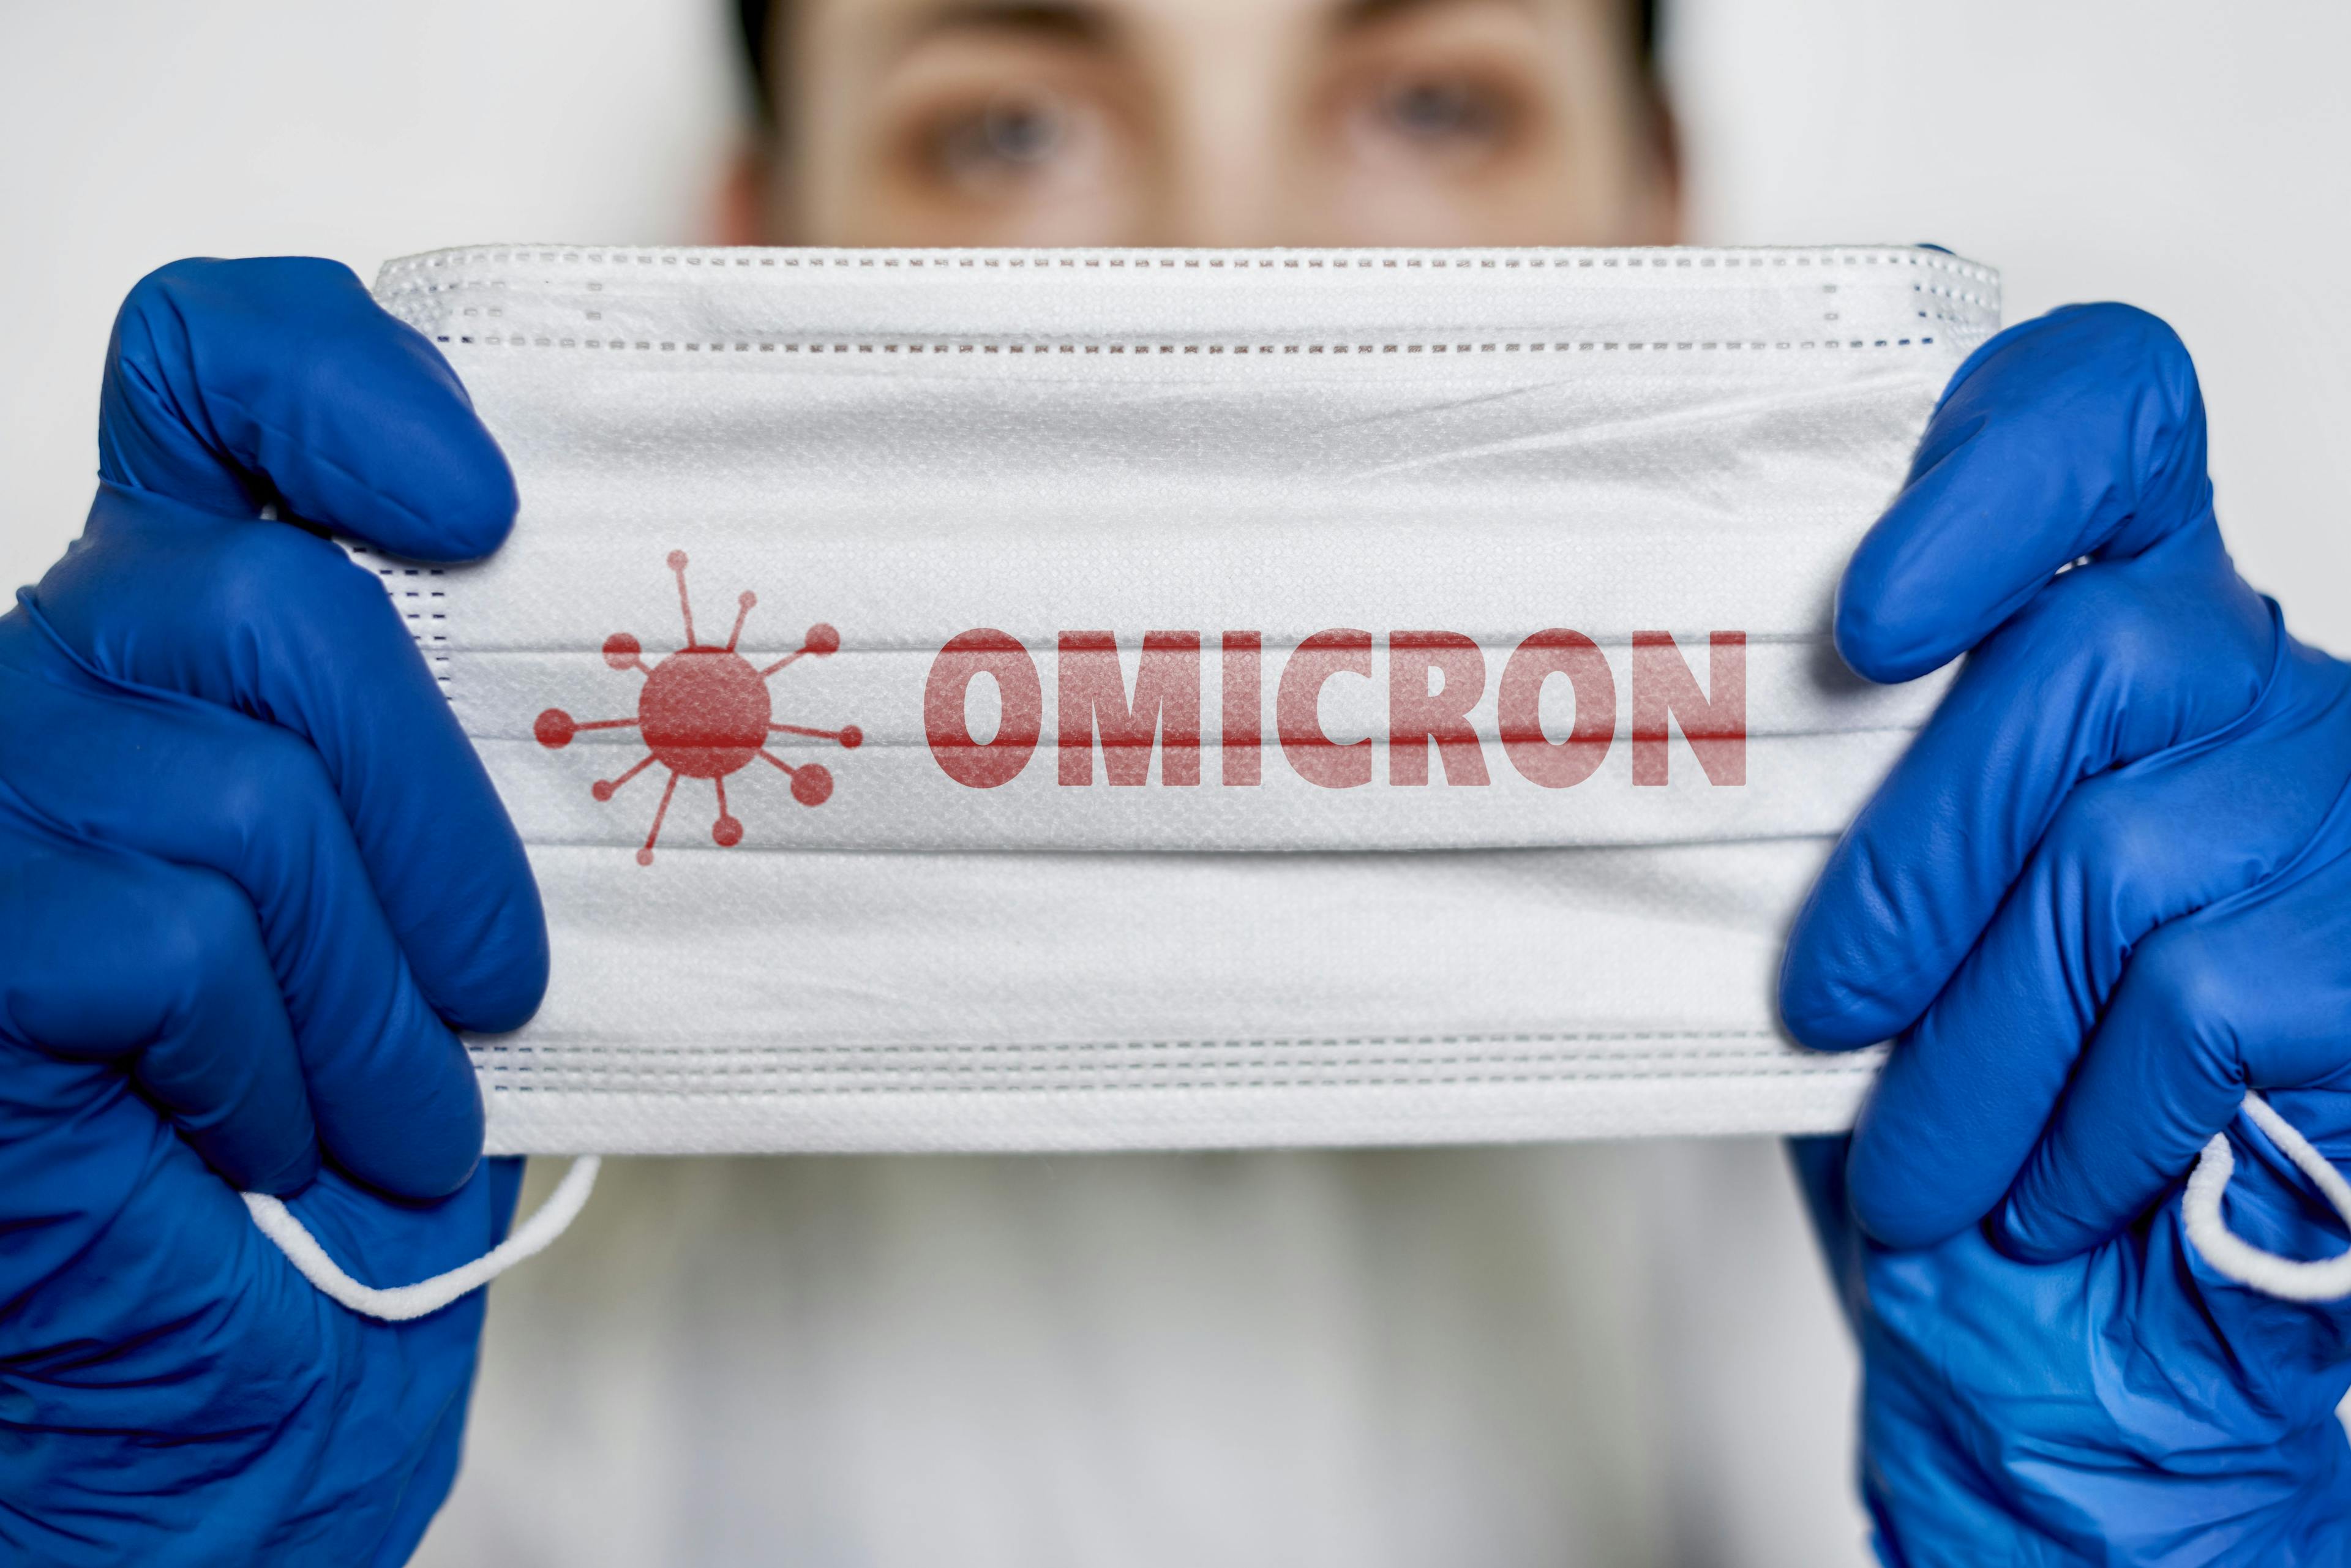 Omicron Update: First French, Japanese Cases; Moderna CEO Says Current Vax Are Probably Not Going To Be As Effective; Tests Suggest That Regeneron, Lilly Antibody Cocktails Not As Effective; and African Union, Other Groups Say Vaccine Equity, Distribution Need Fixing